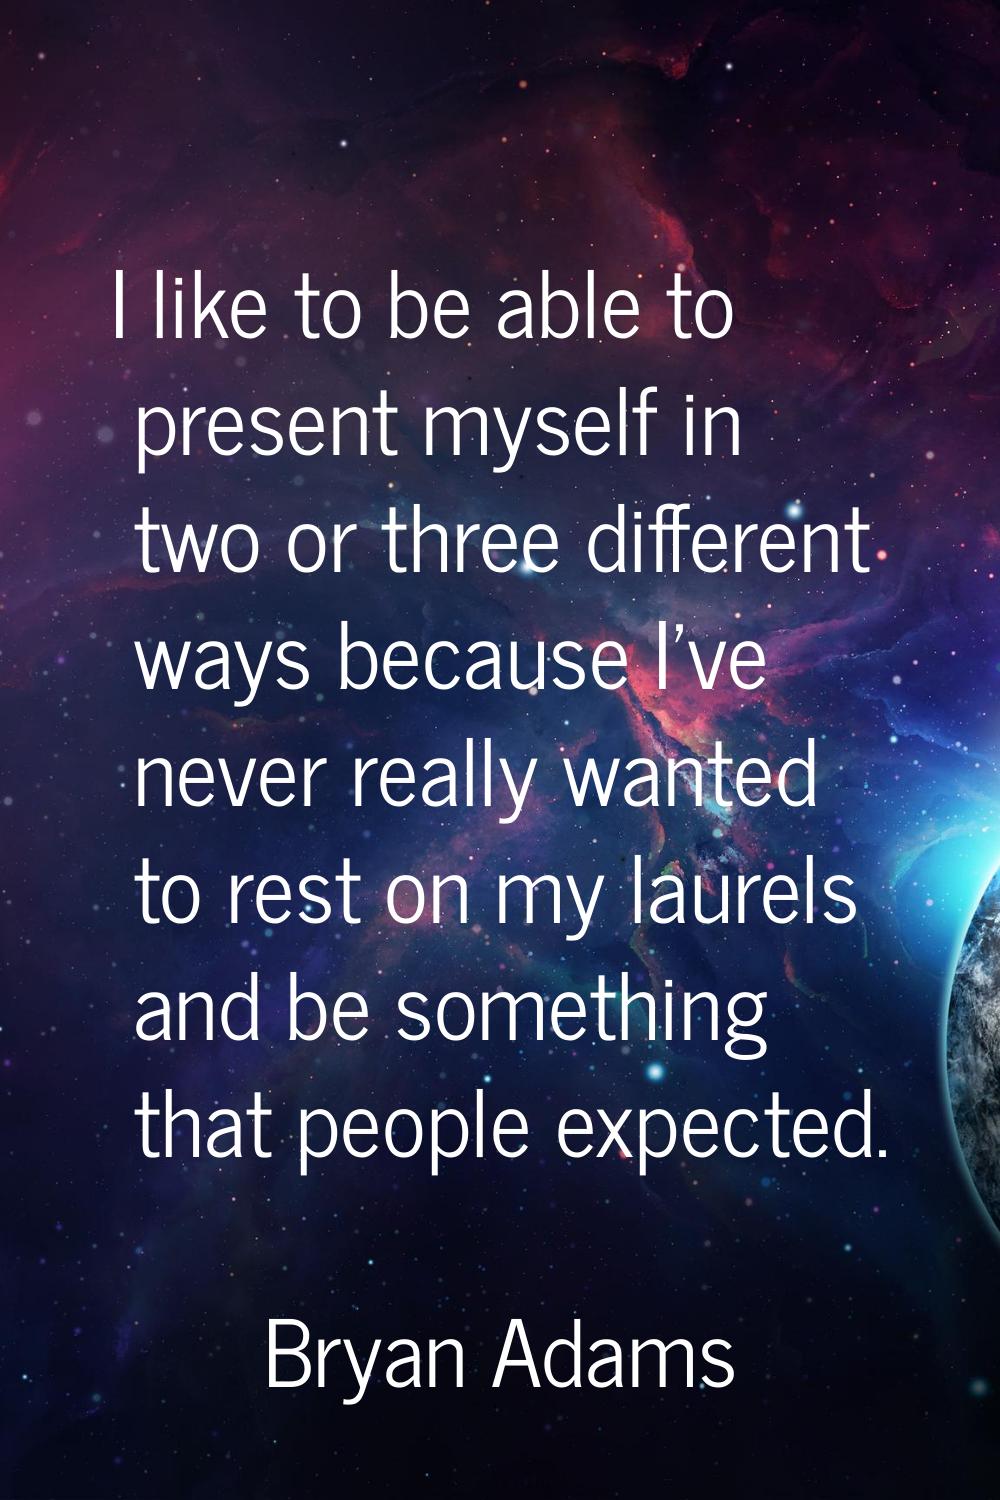 I like to be able to present myself in two or three different ways because I've never really wanted